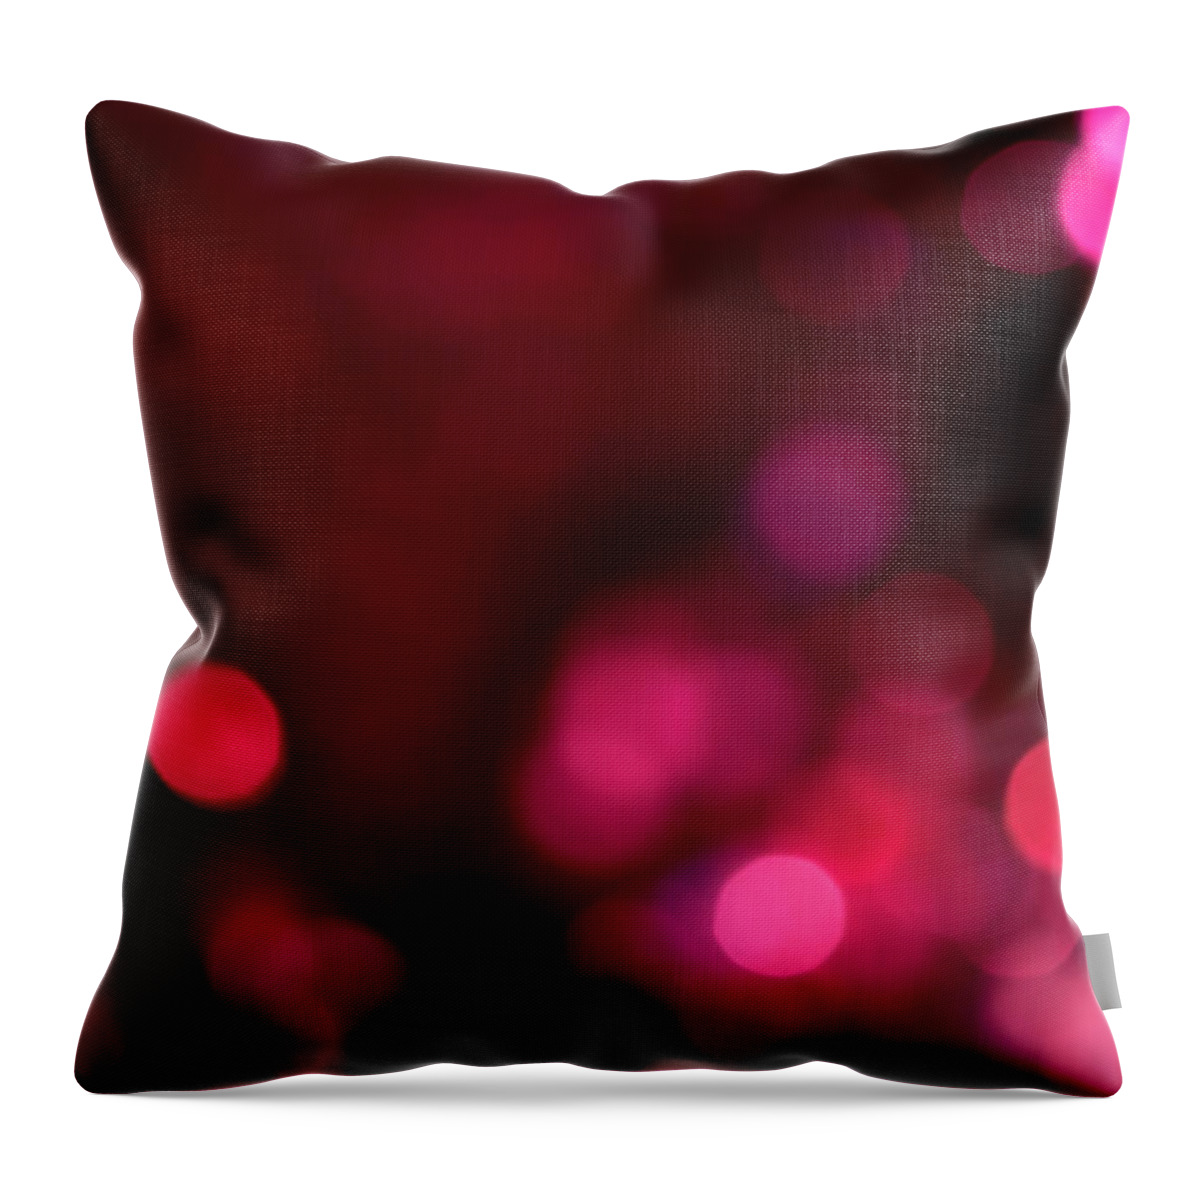 Orange Color Throw Pillow featuring the photograph Defocused Red Lights by Gm Stock Films